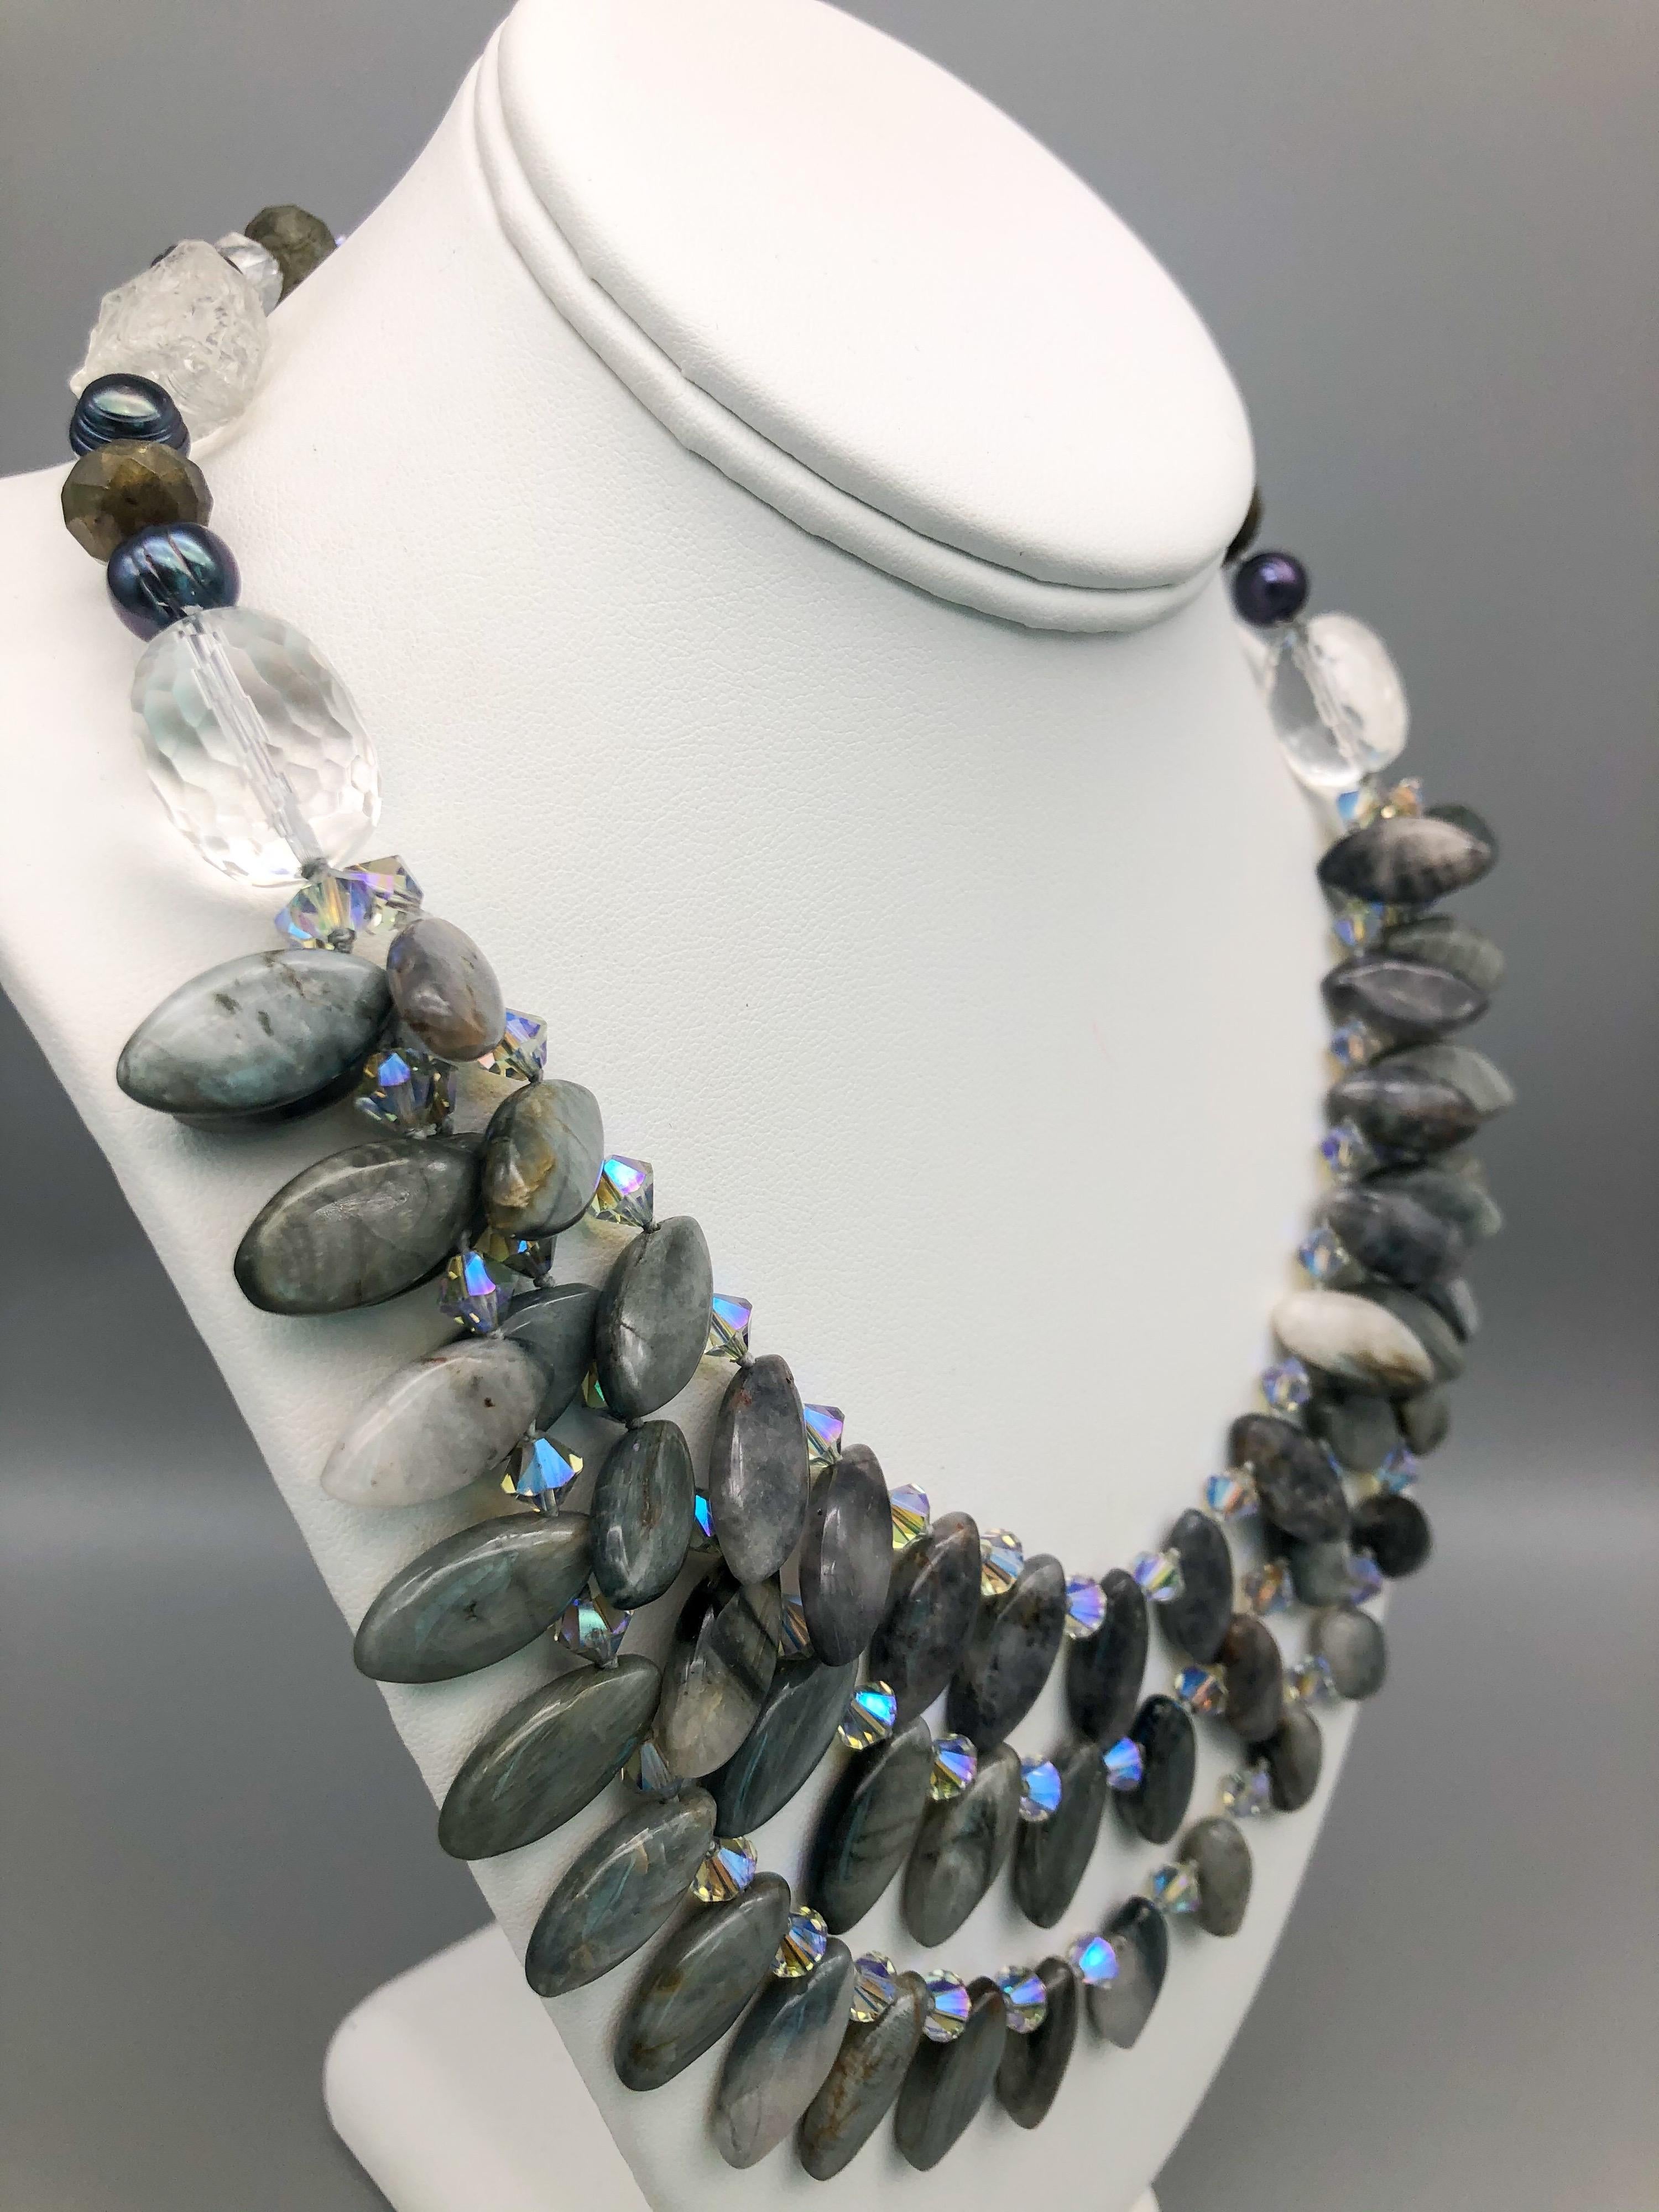 One-of-a-Kind
Highly polished Labradorite petals spaced between Swarovski Crystals are draped into 3 strands caught at the collarbone with a large cut Crystal bead to form a single strand continuation of hammered Crystal gray Pearls and faceted